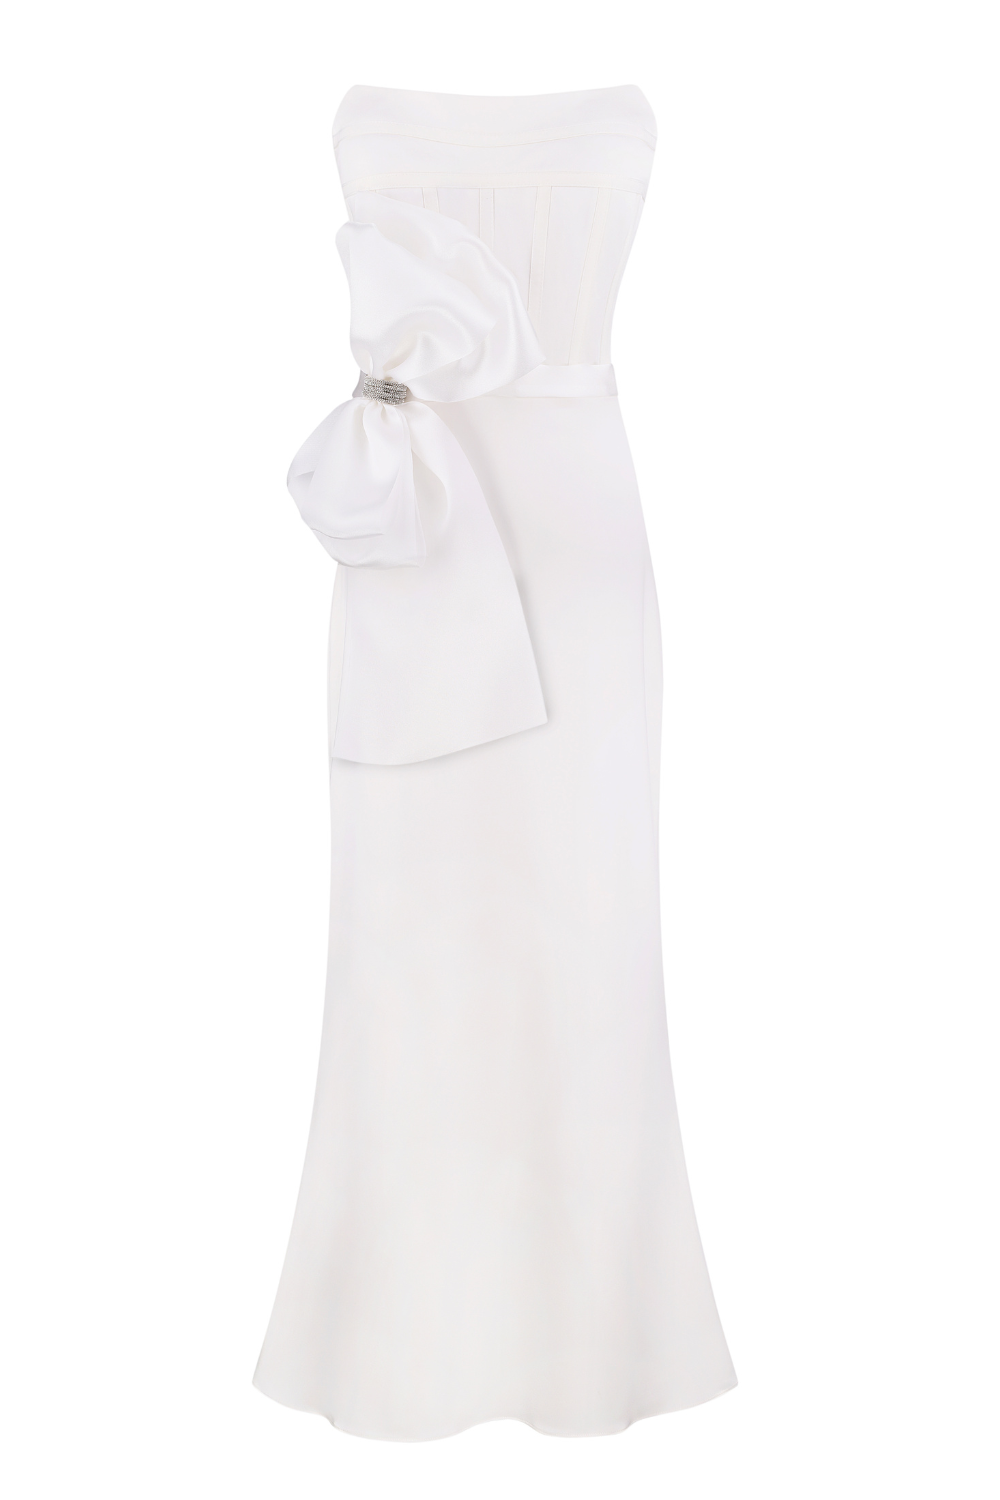 Organza midi dress with bow (Total White) G2409